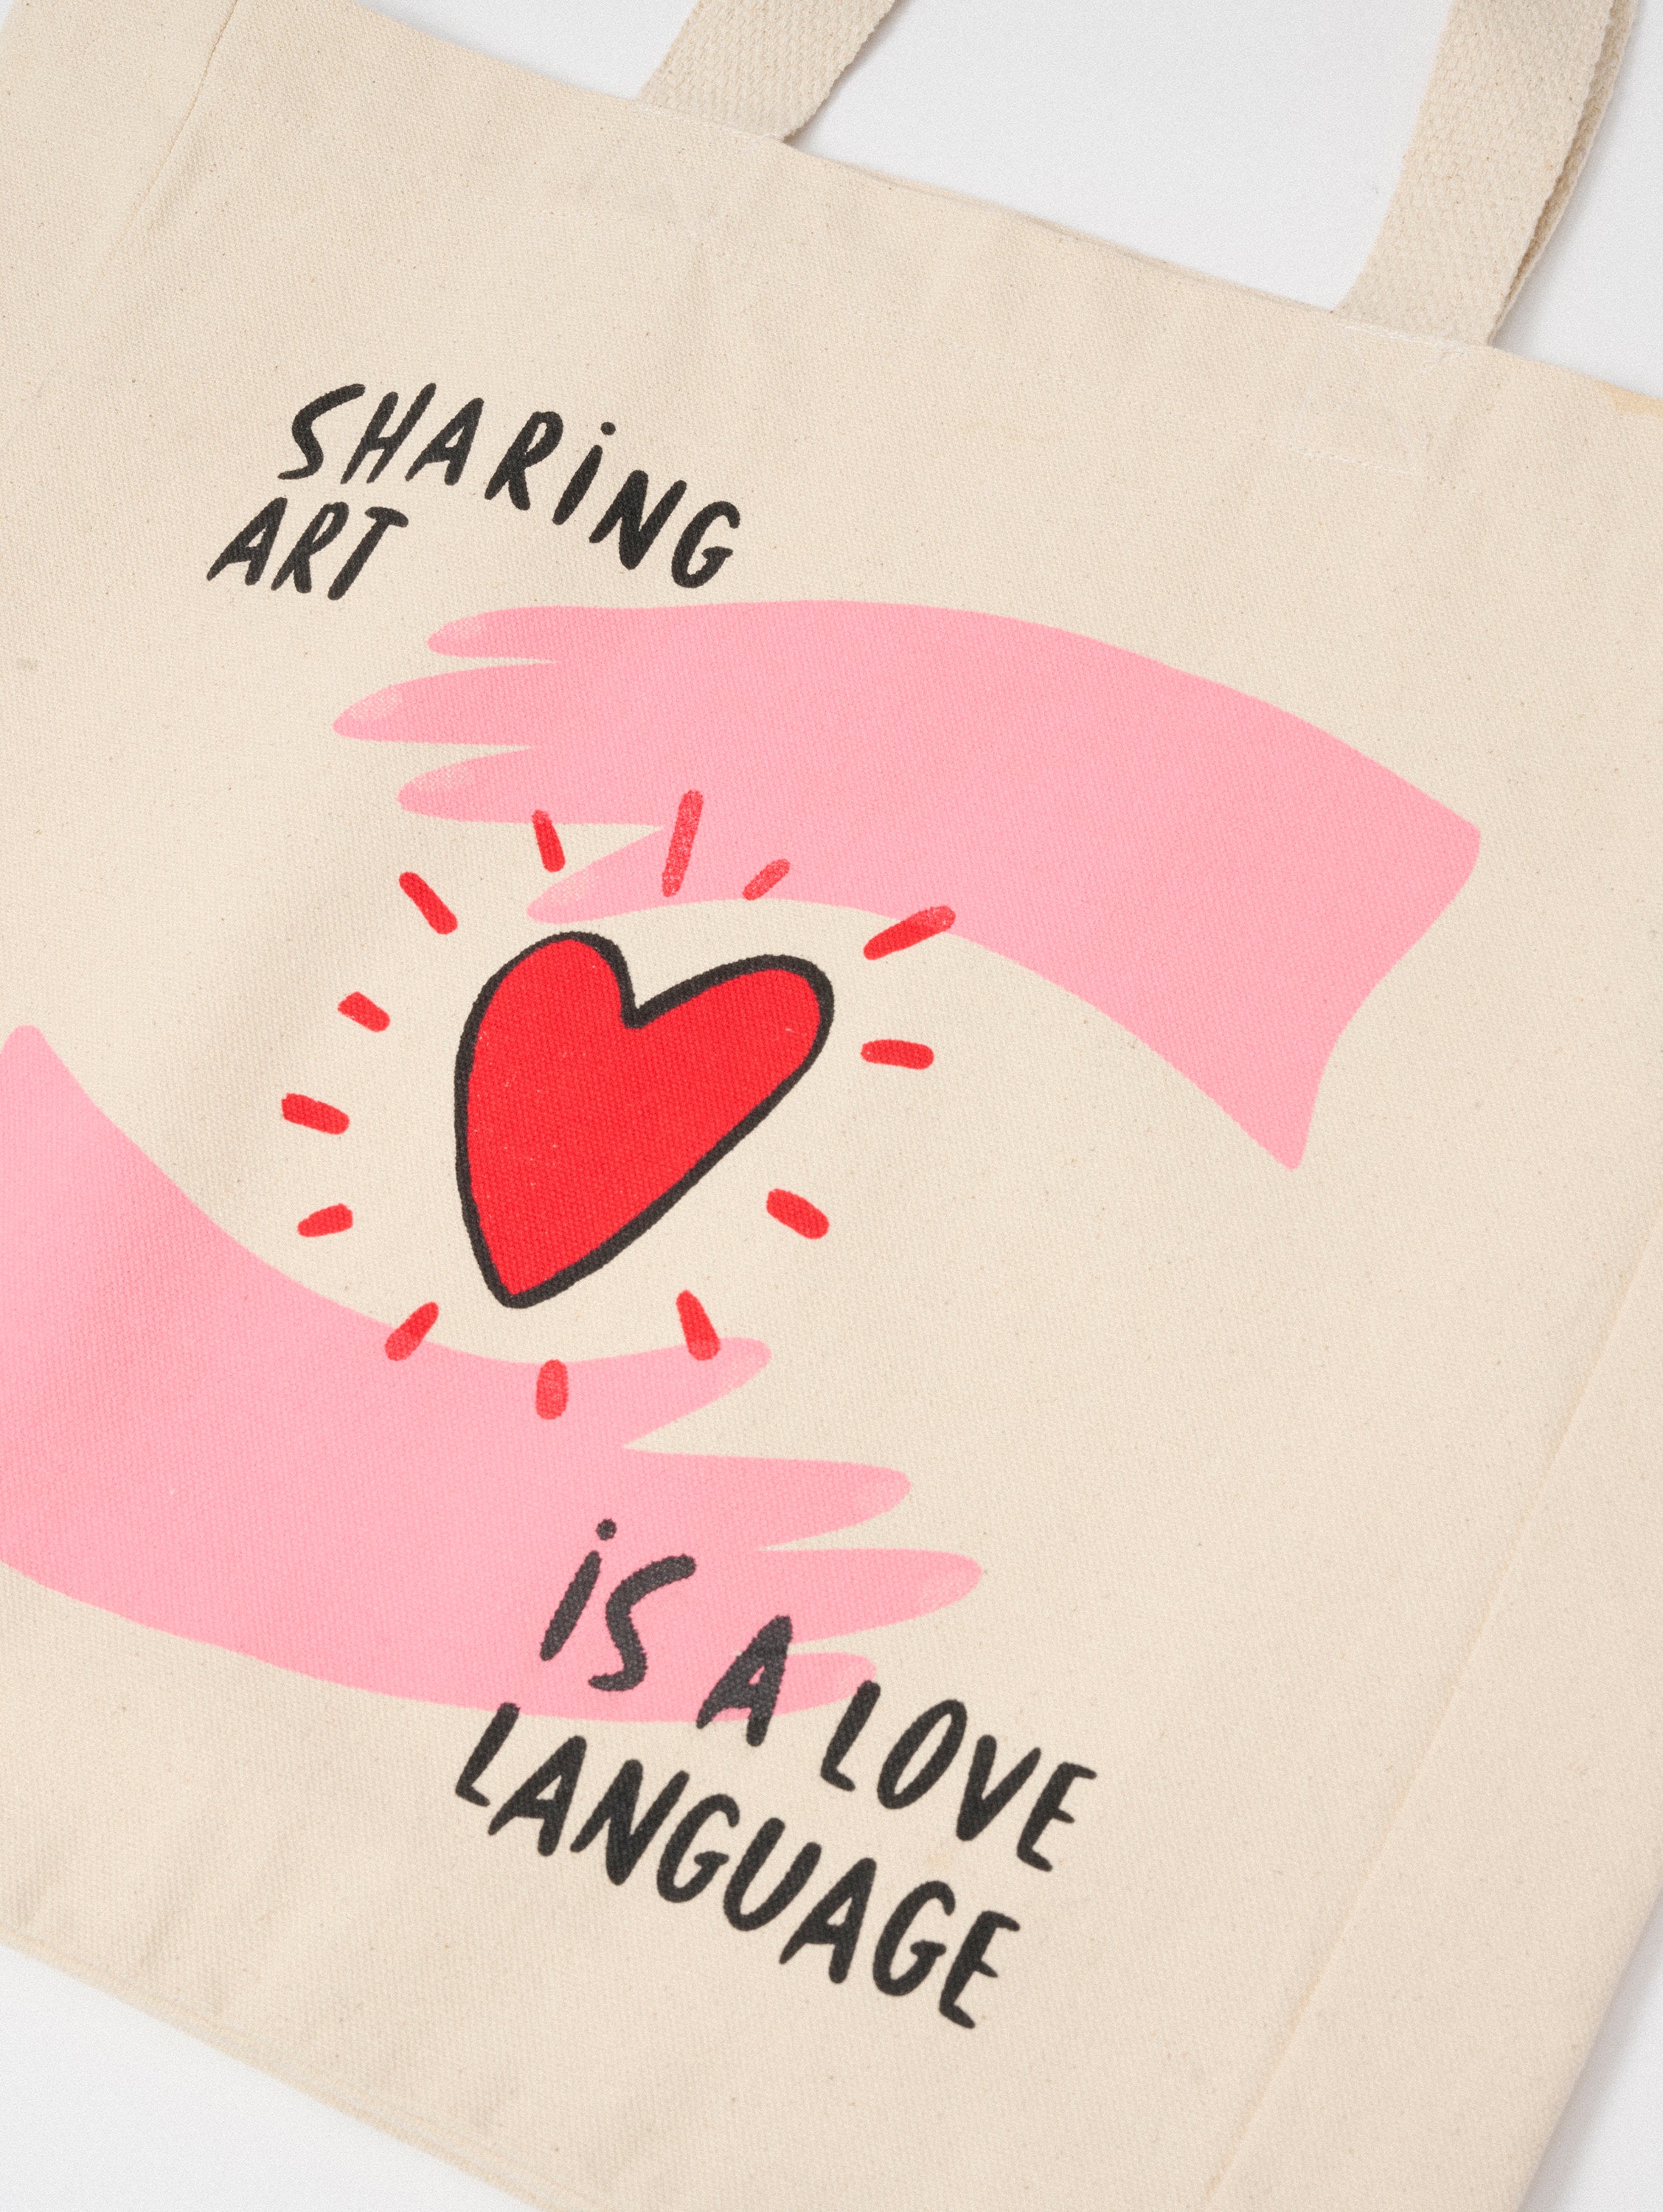 TOTE SHARING ART IS A LOVE LENGUAGE (VALENTINE'S DAY EDITION)